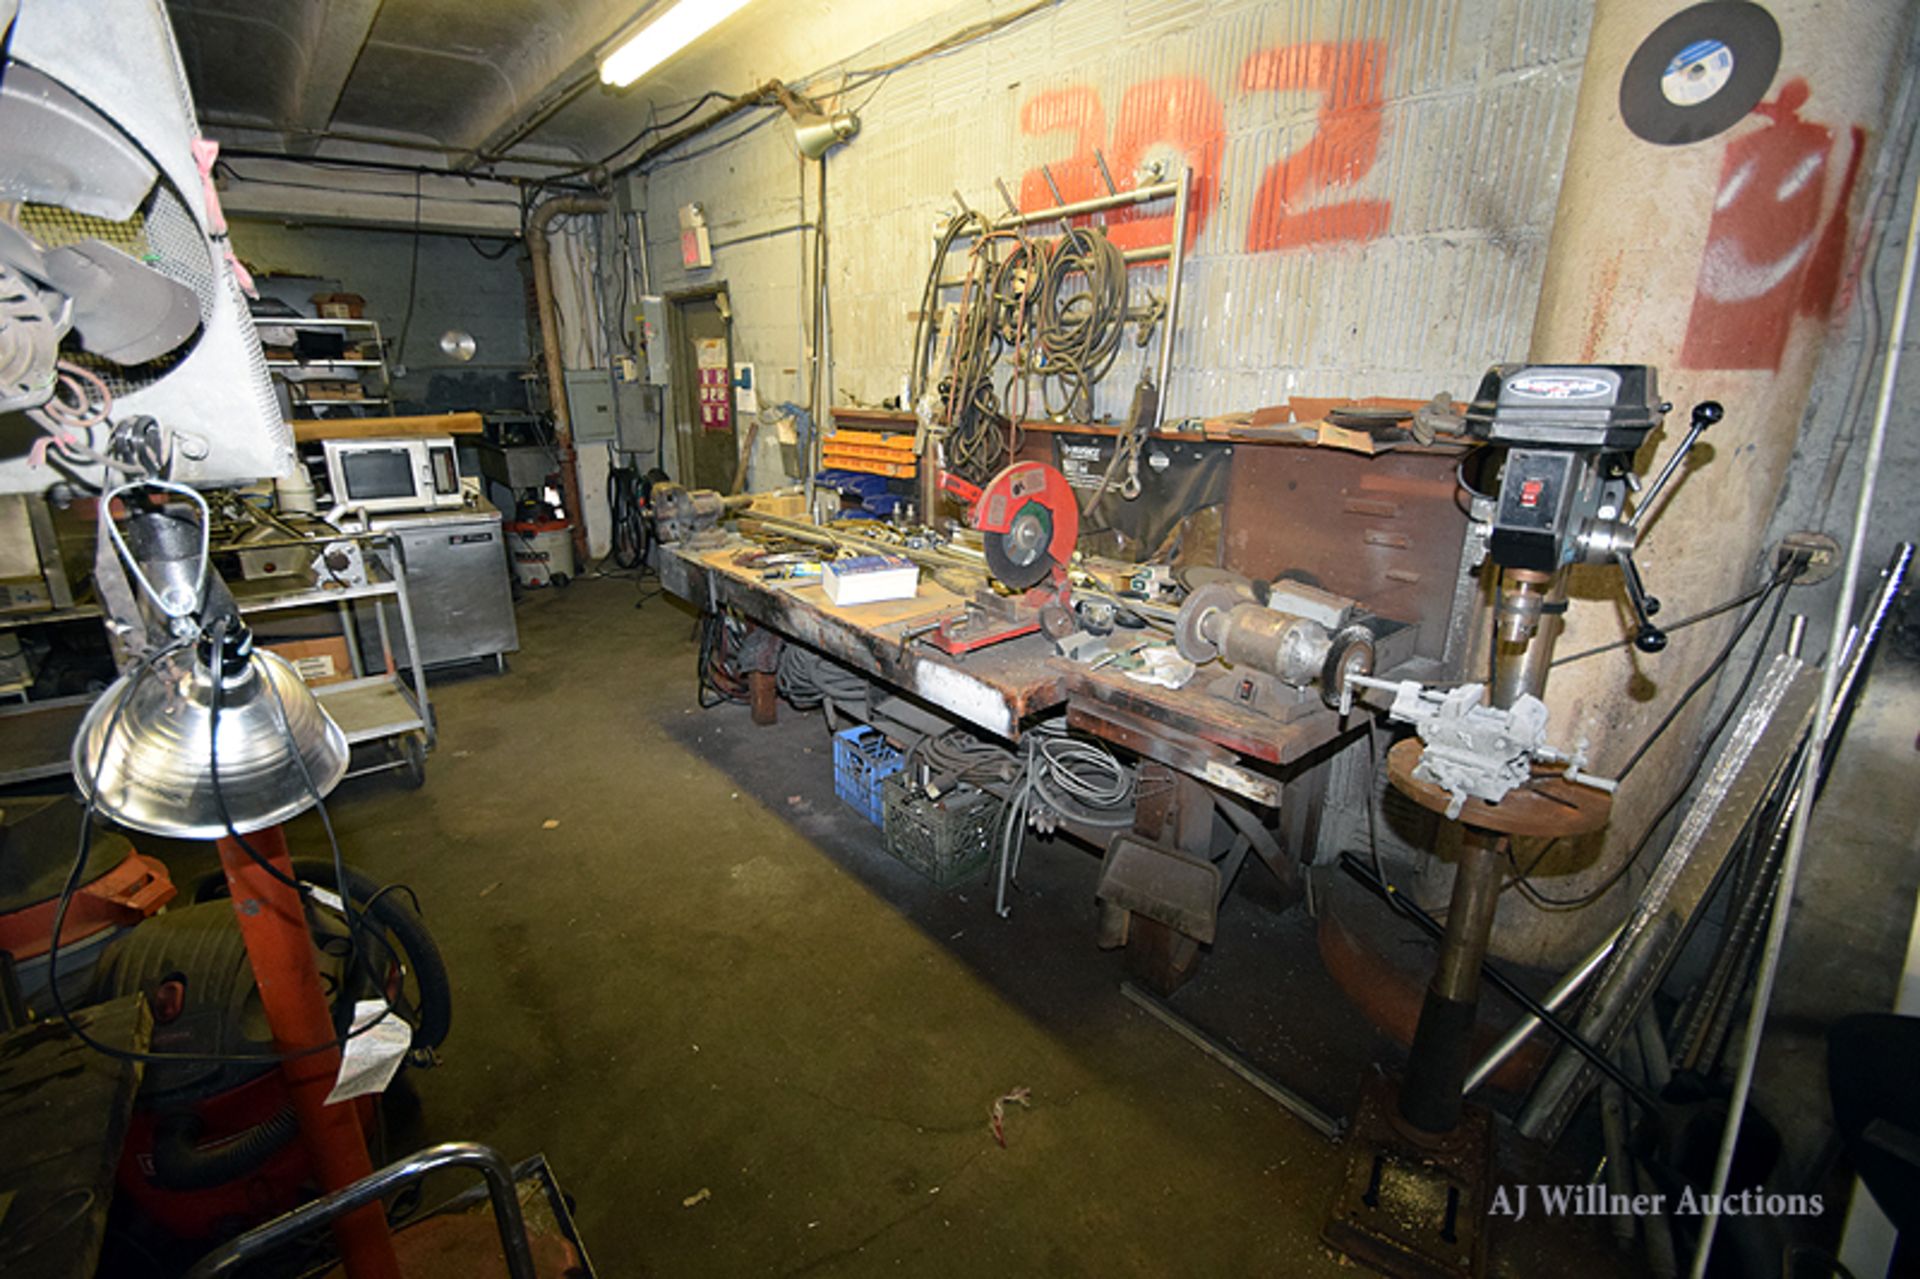 Contents of Workshop; Tools, Vacuums, Parts, Etc. - Image 12 of 13